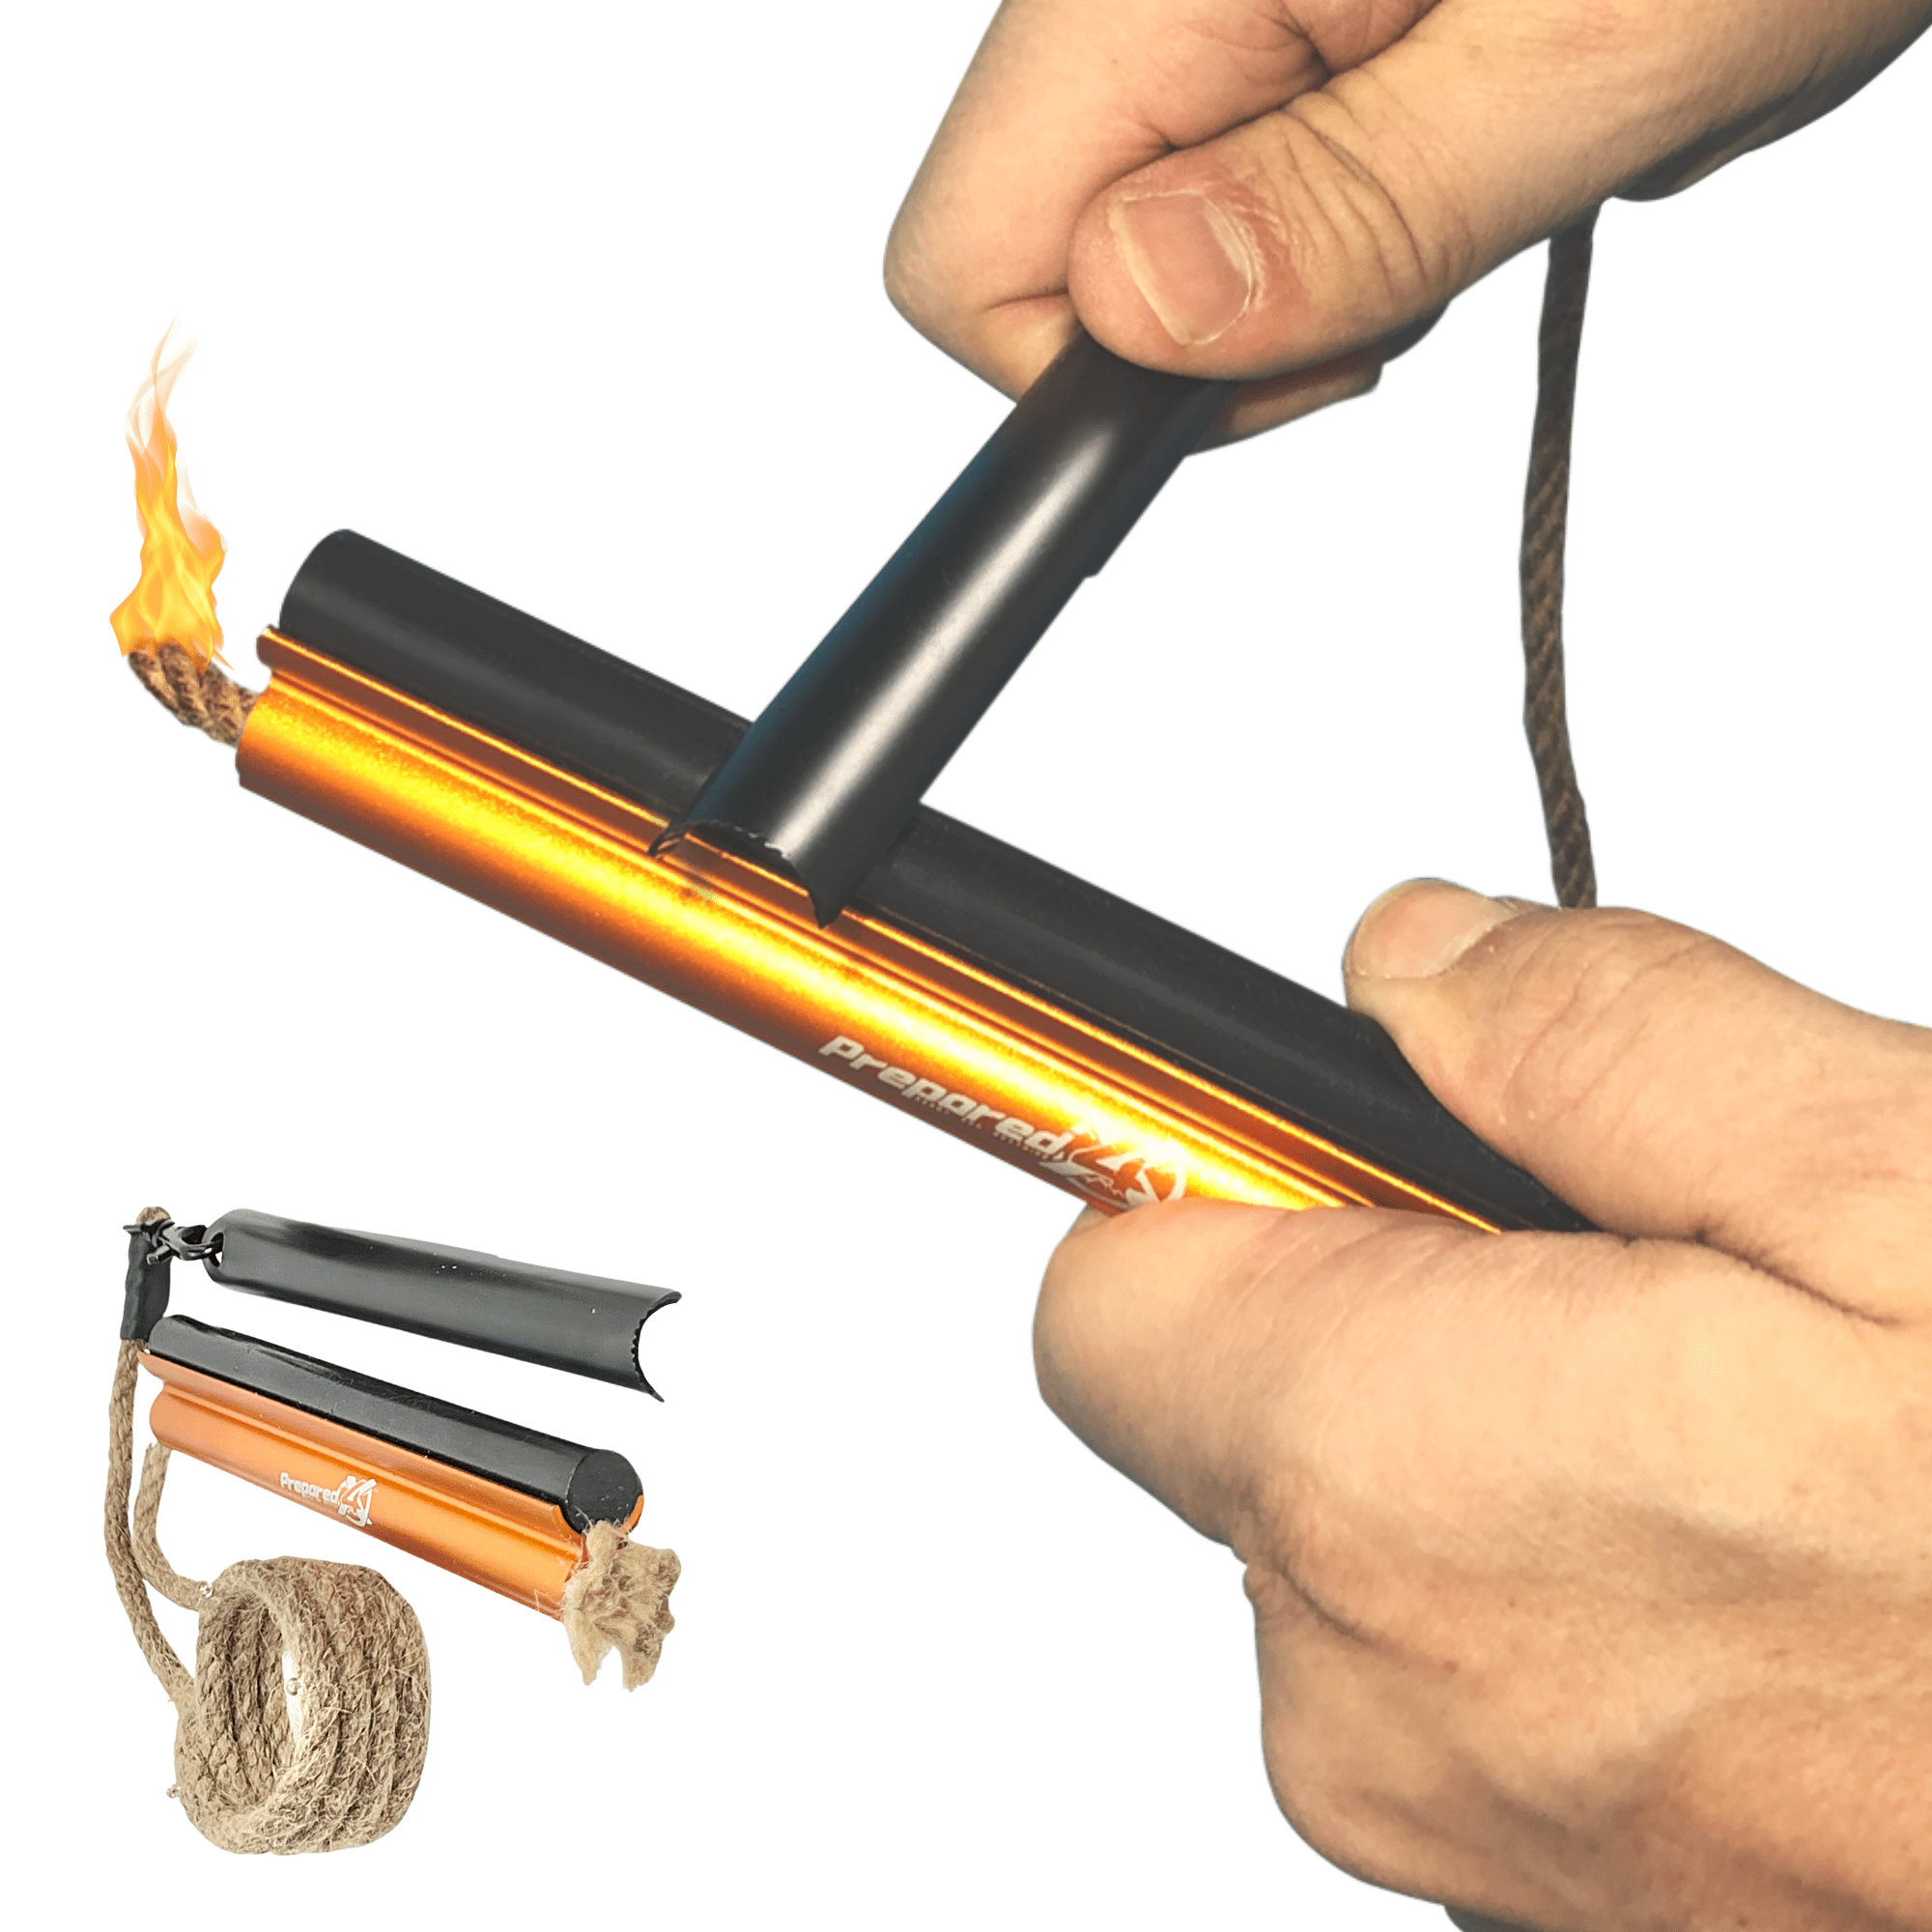 20 X Outdoor Survival Hunting Camping Emergency Heat Light Fire Buddy Tinder 